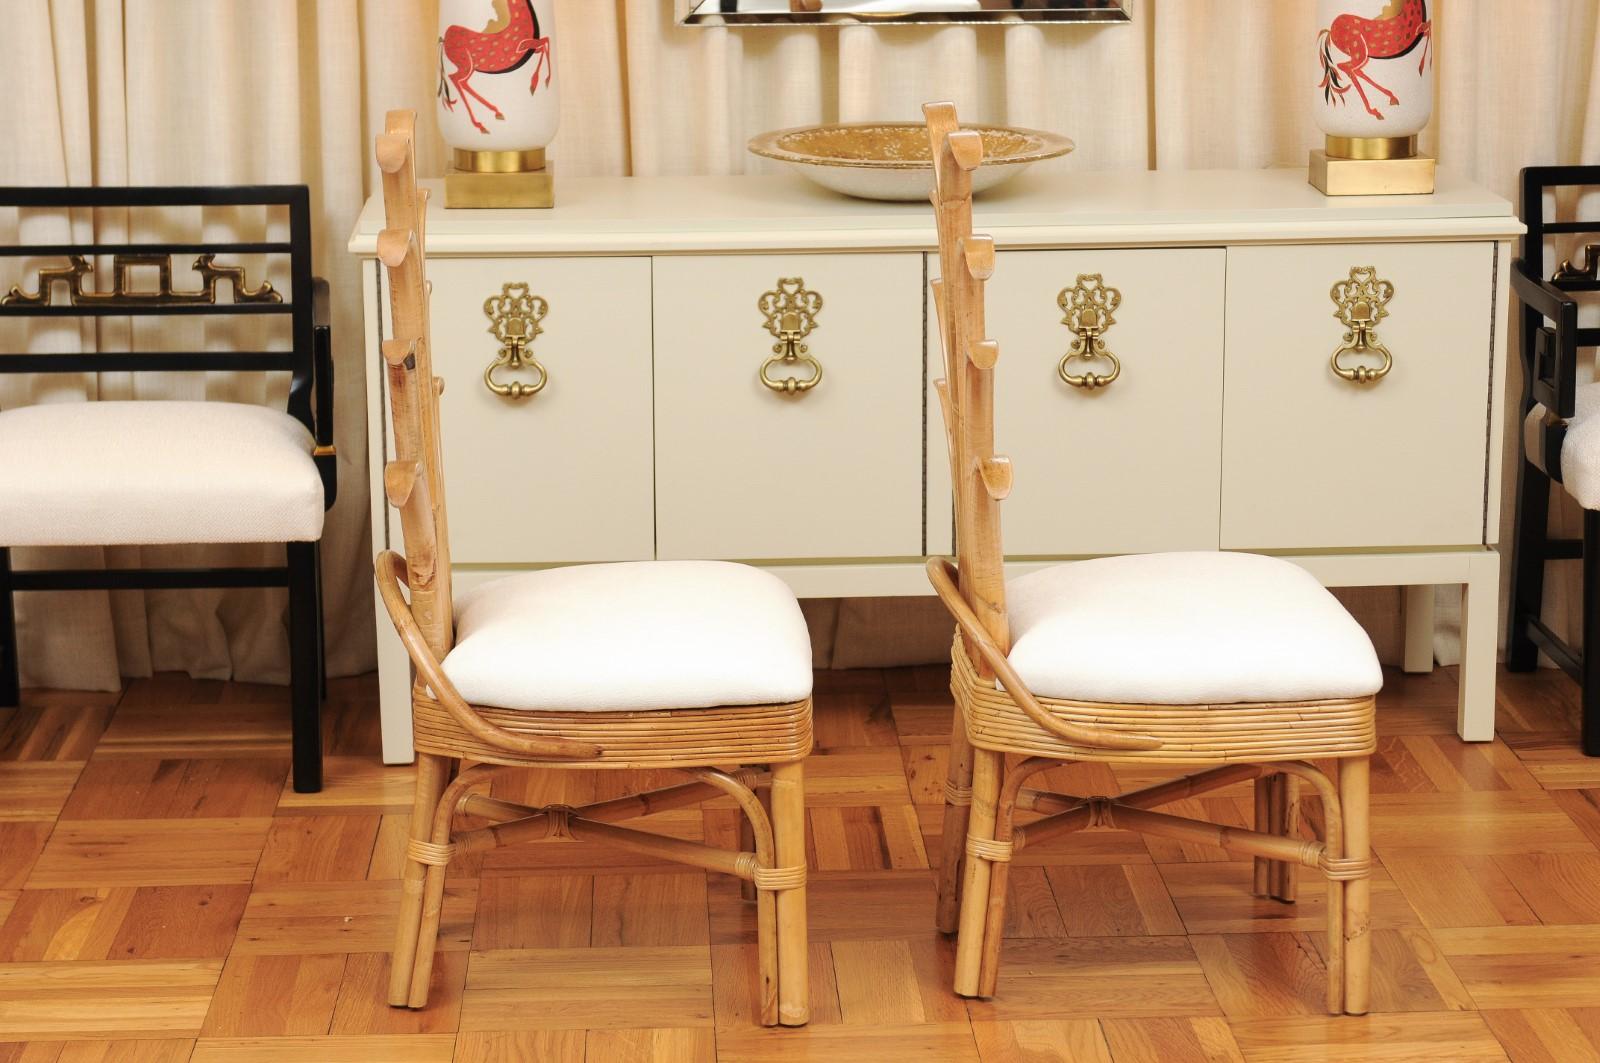 Exquisite Set of 10 Rattan and Cane Palm Frond Dining Chairs, circa 1950 For Sale 2